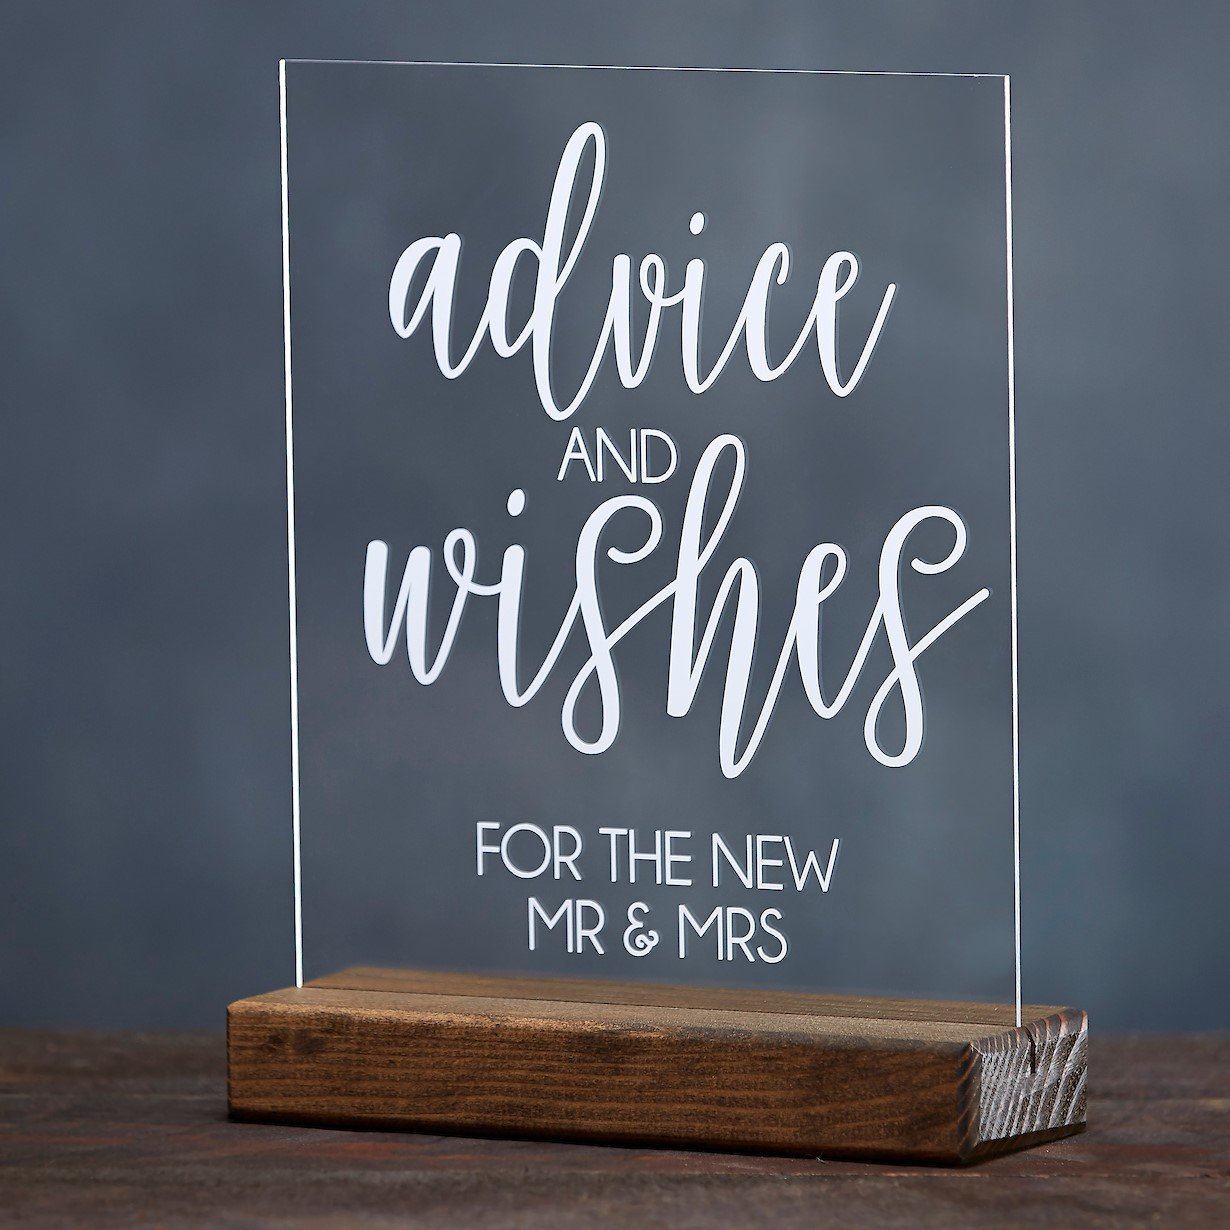 Advice and Wishes Clear Acrylic Sign - Rich Design Co